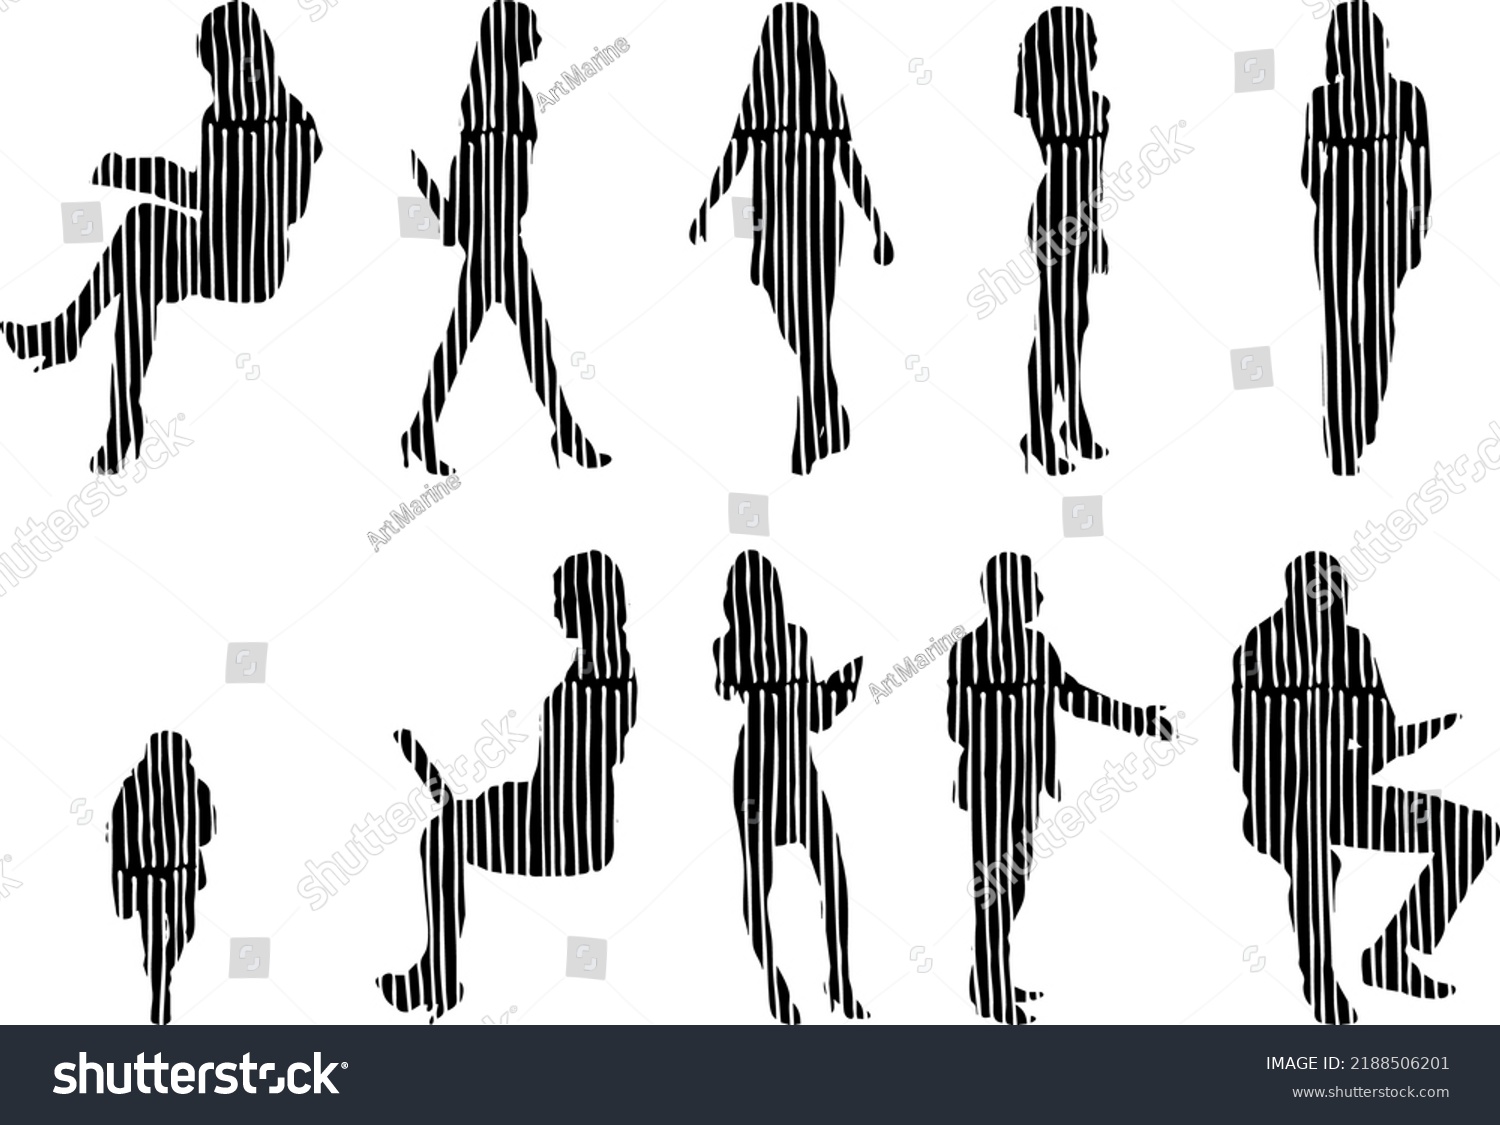 Vector Silhouettes Outline Silhouettes People Contour Stock Vector Royalty Free